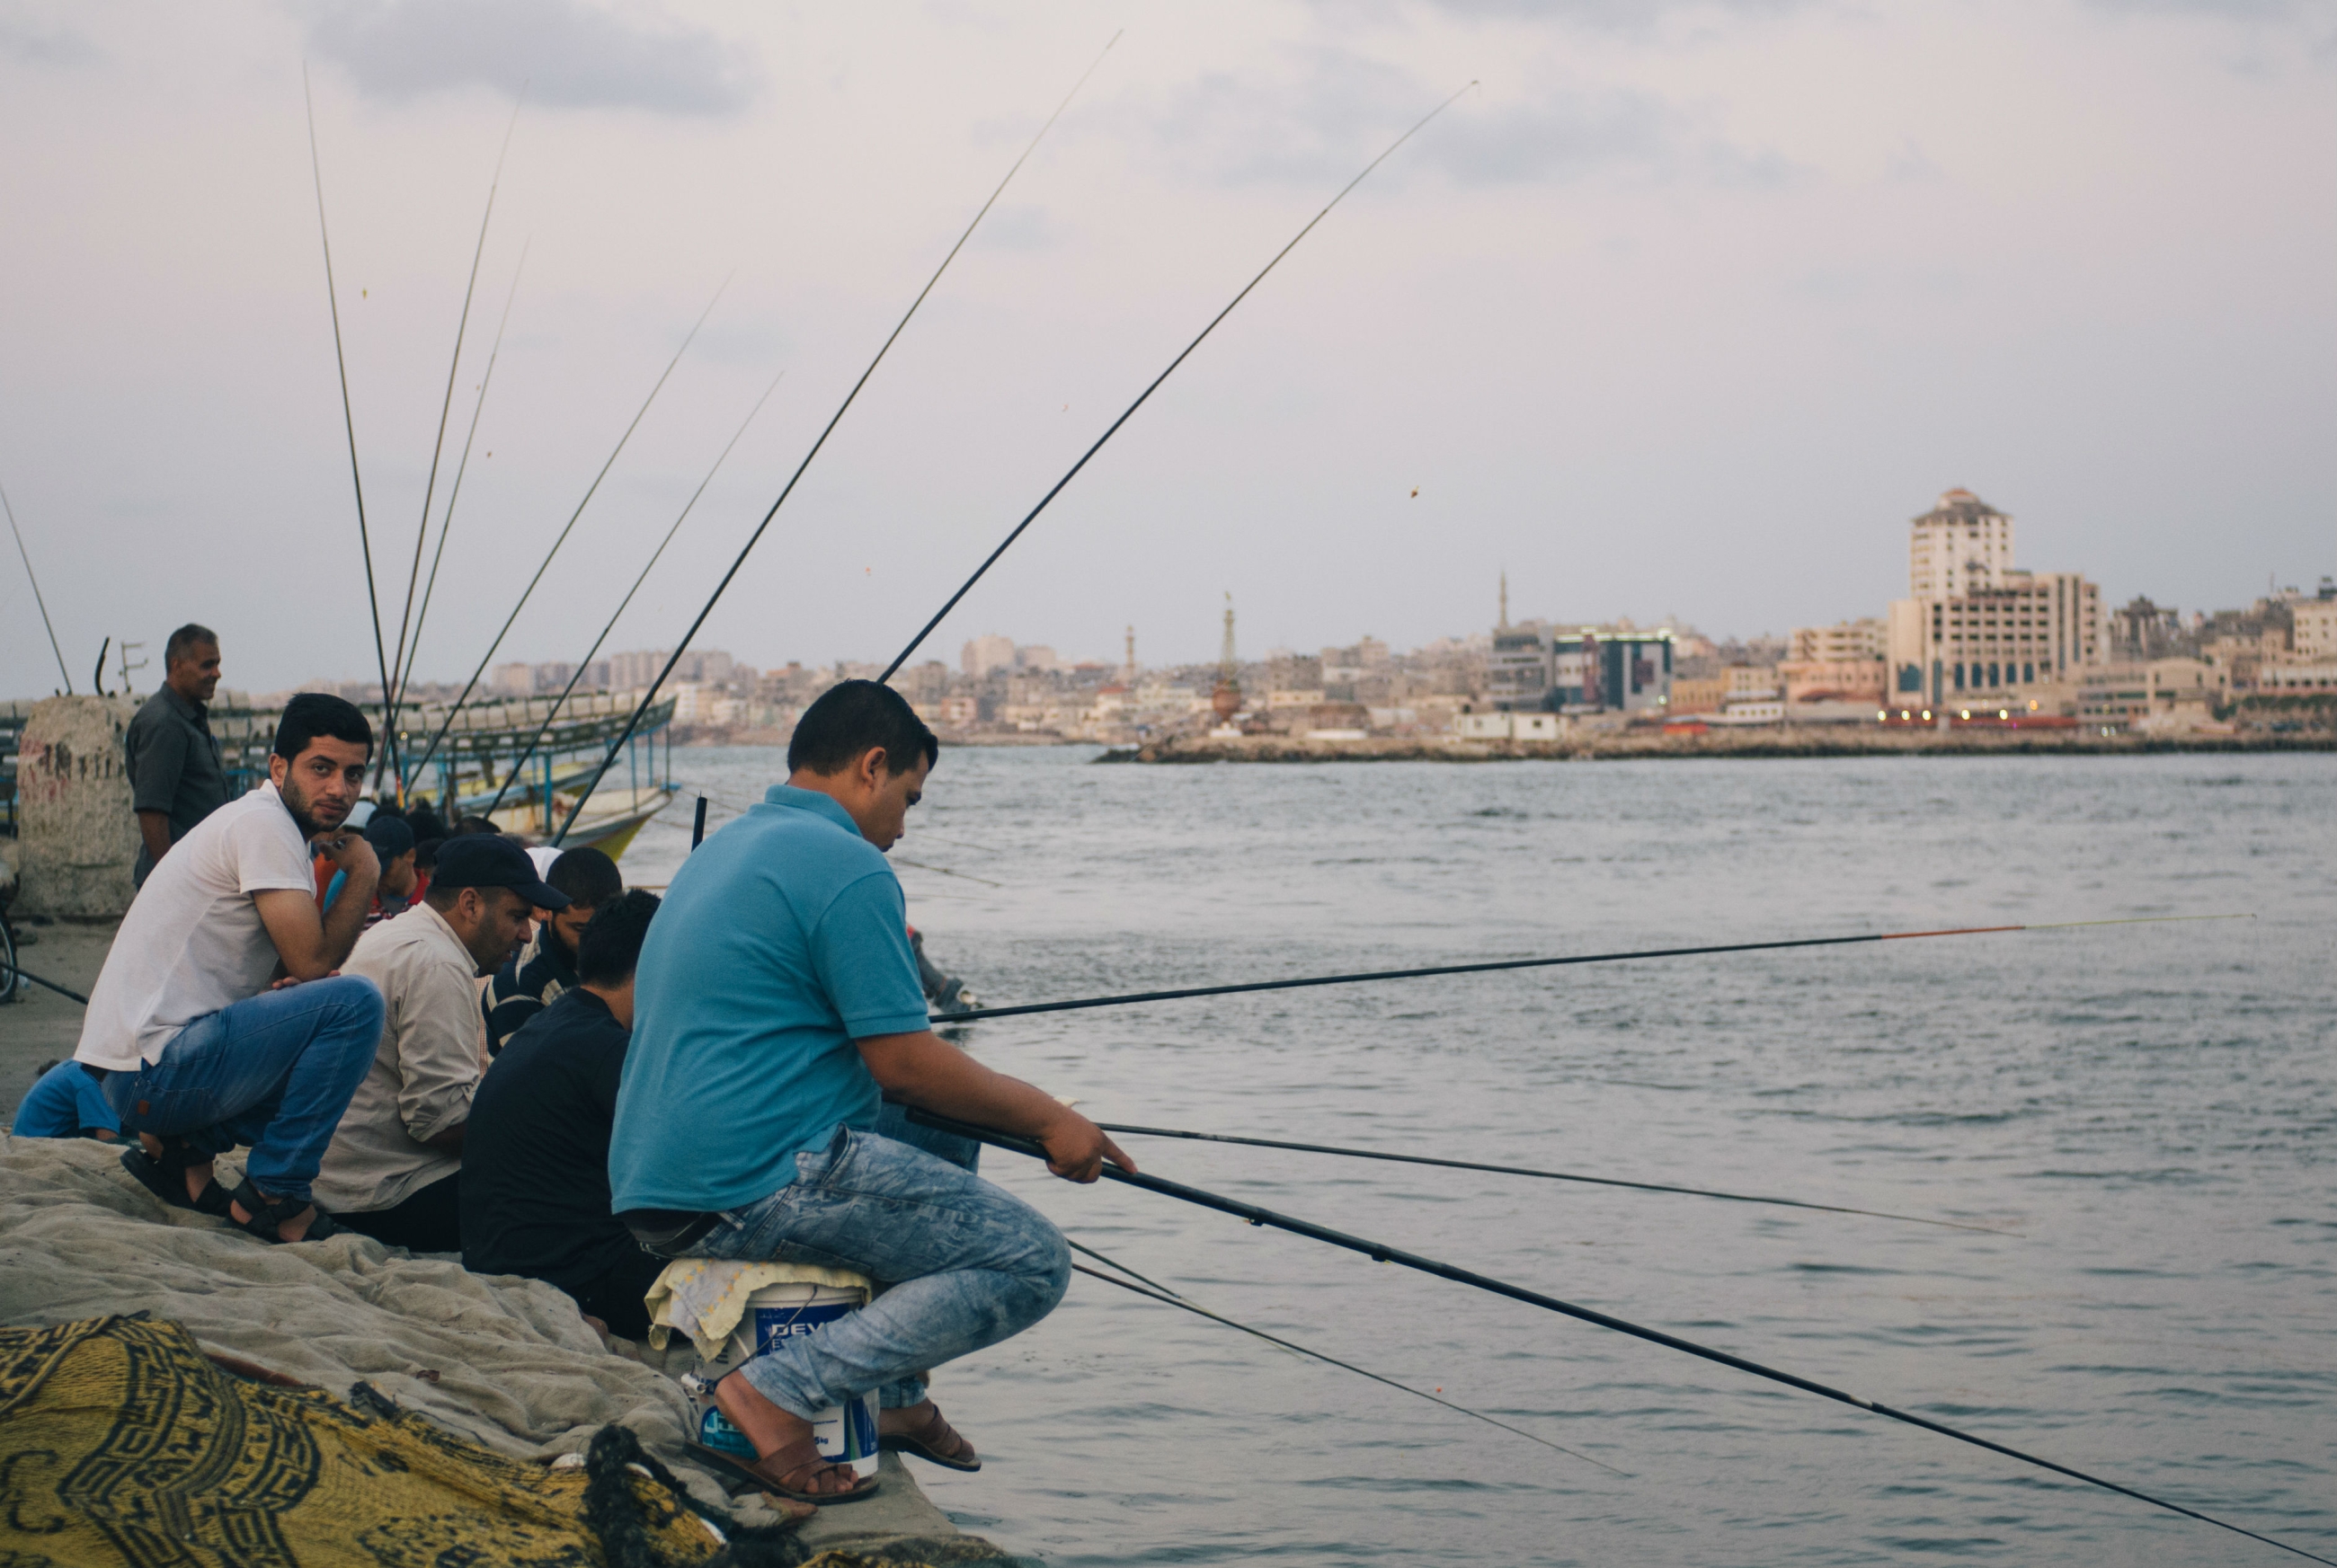 Palestinian men sit together at Gaza's port when they don't have work, which is often for the enclave's many unemployed, drinking coffee as they watch their rods